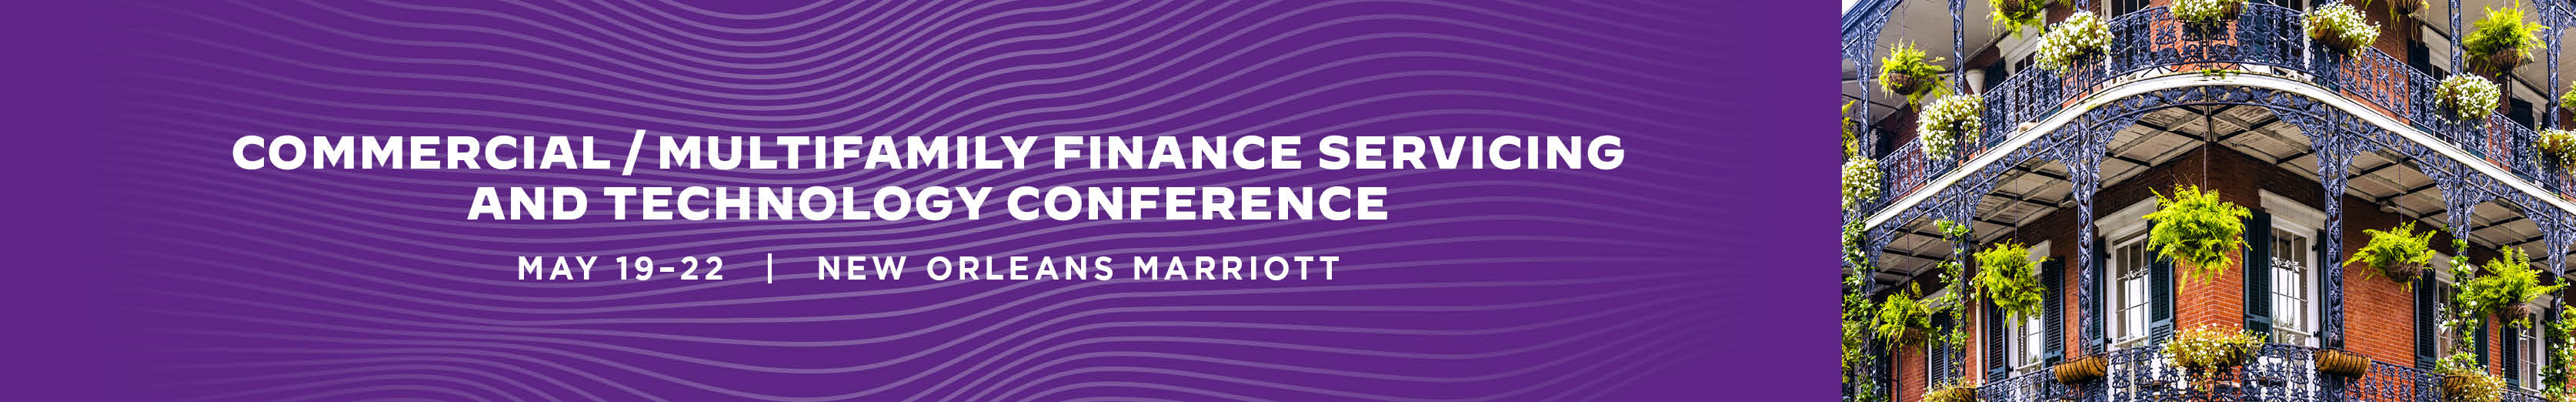 Header Banner - Commercial/Multifamily Finance Servicing and Technology Conference